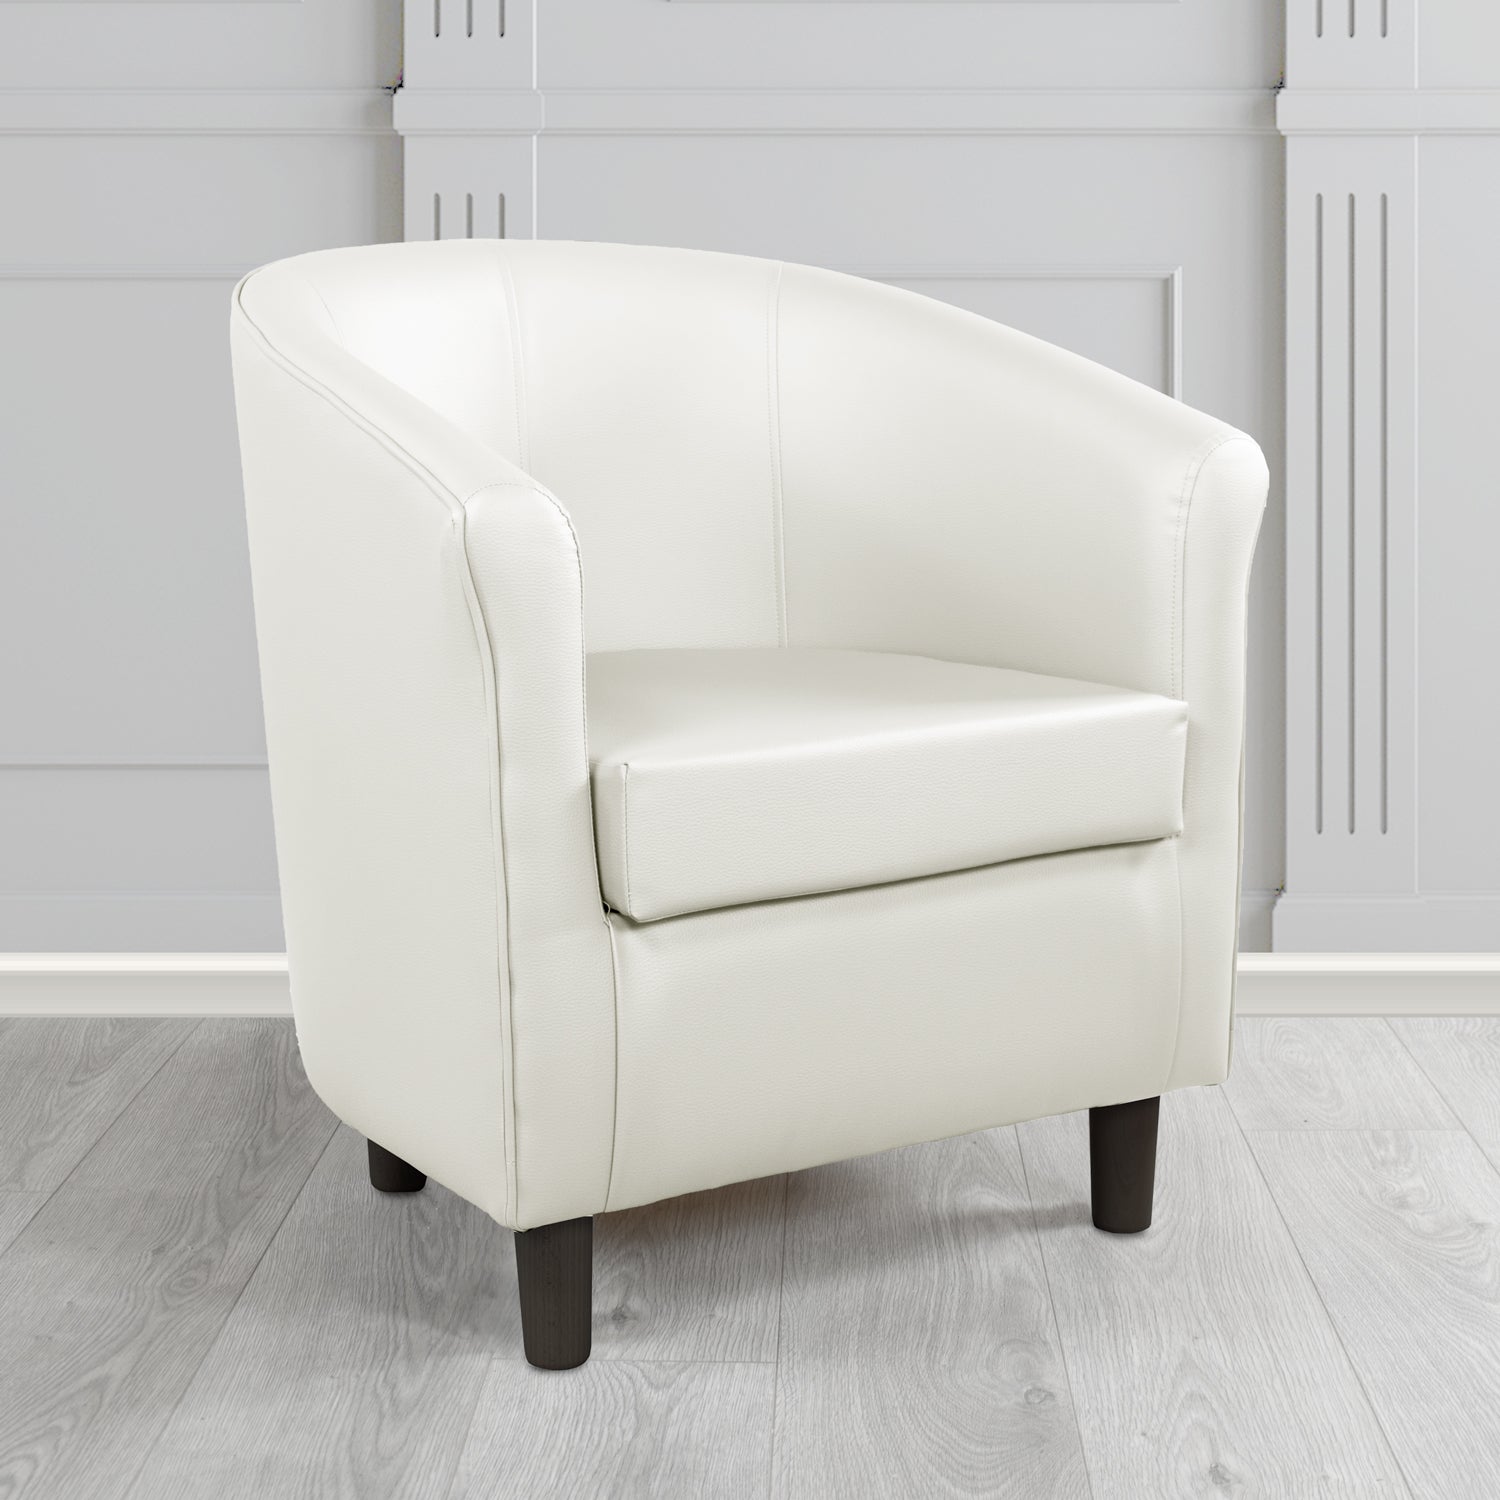 Tuscany Memphis Oyster MEM113 Antimicrobial Crib 5 Contract Faux Leather Tub Chair - The Tub Chair Shop